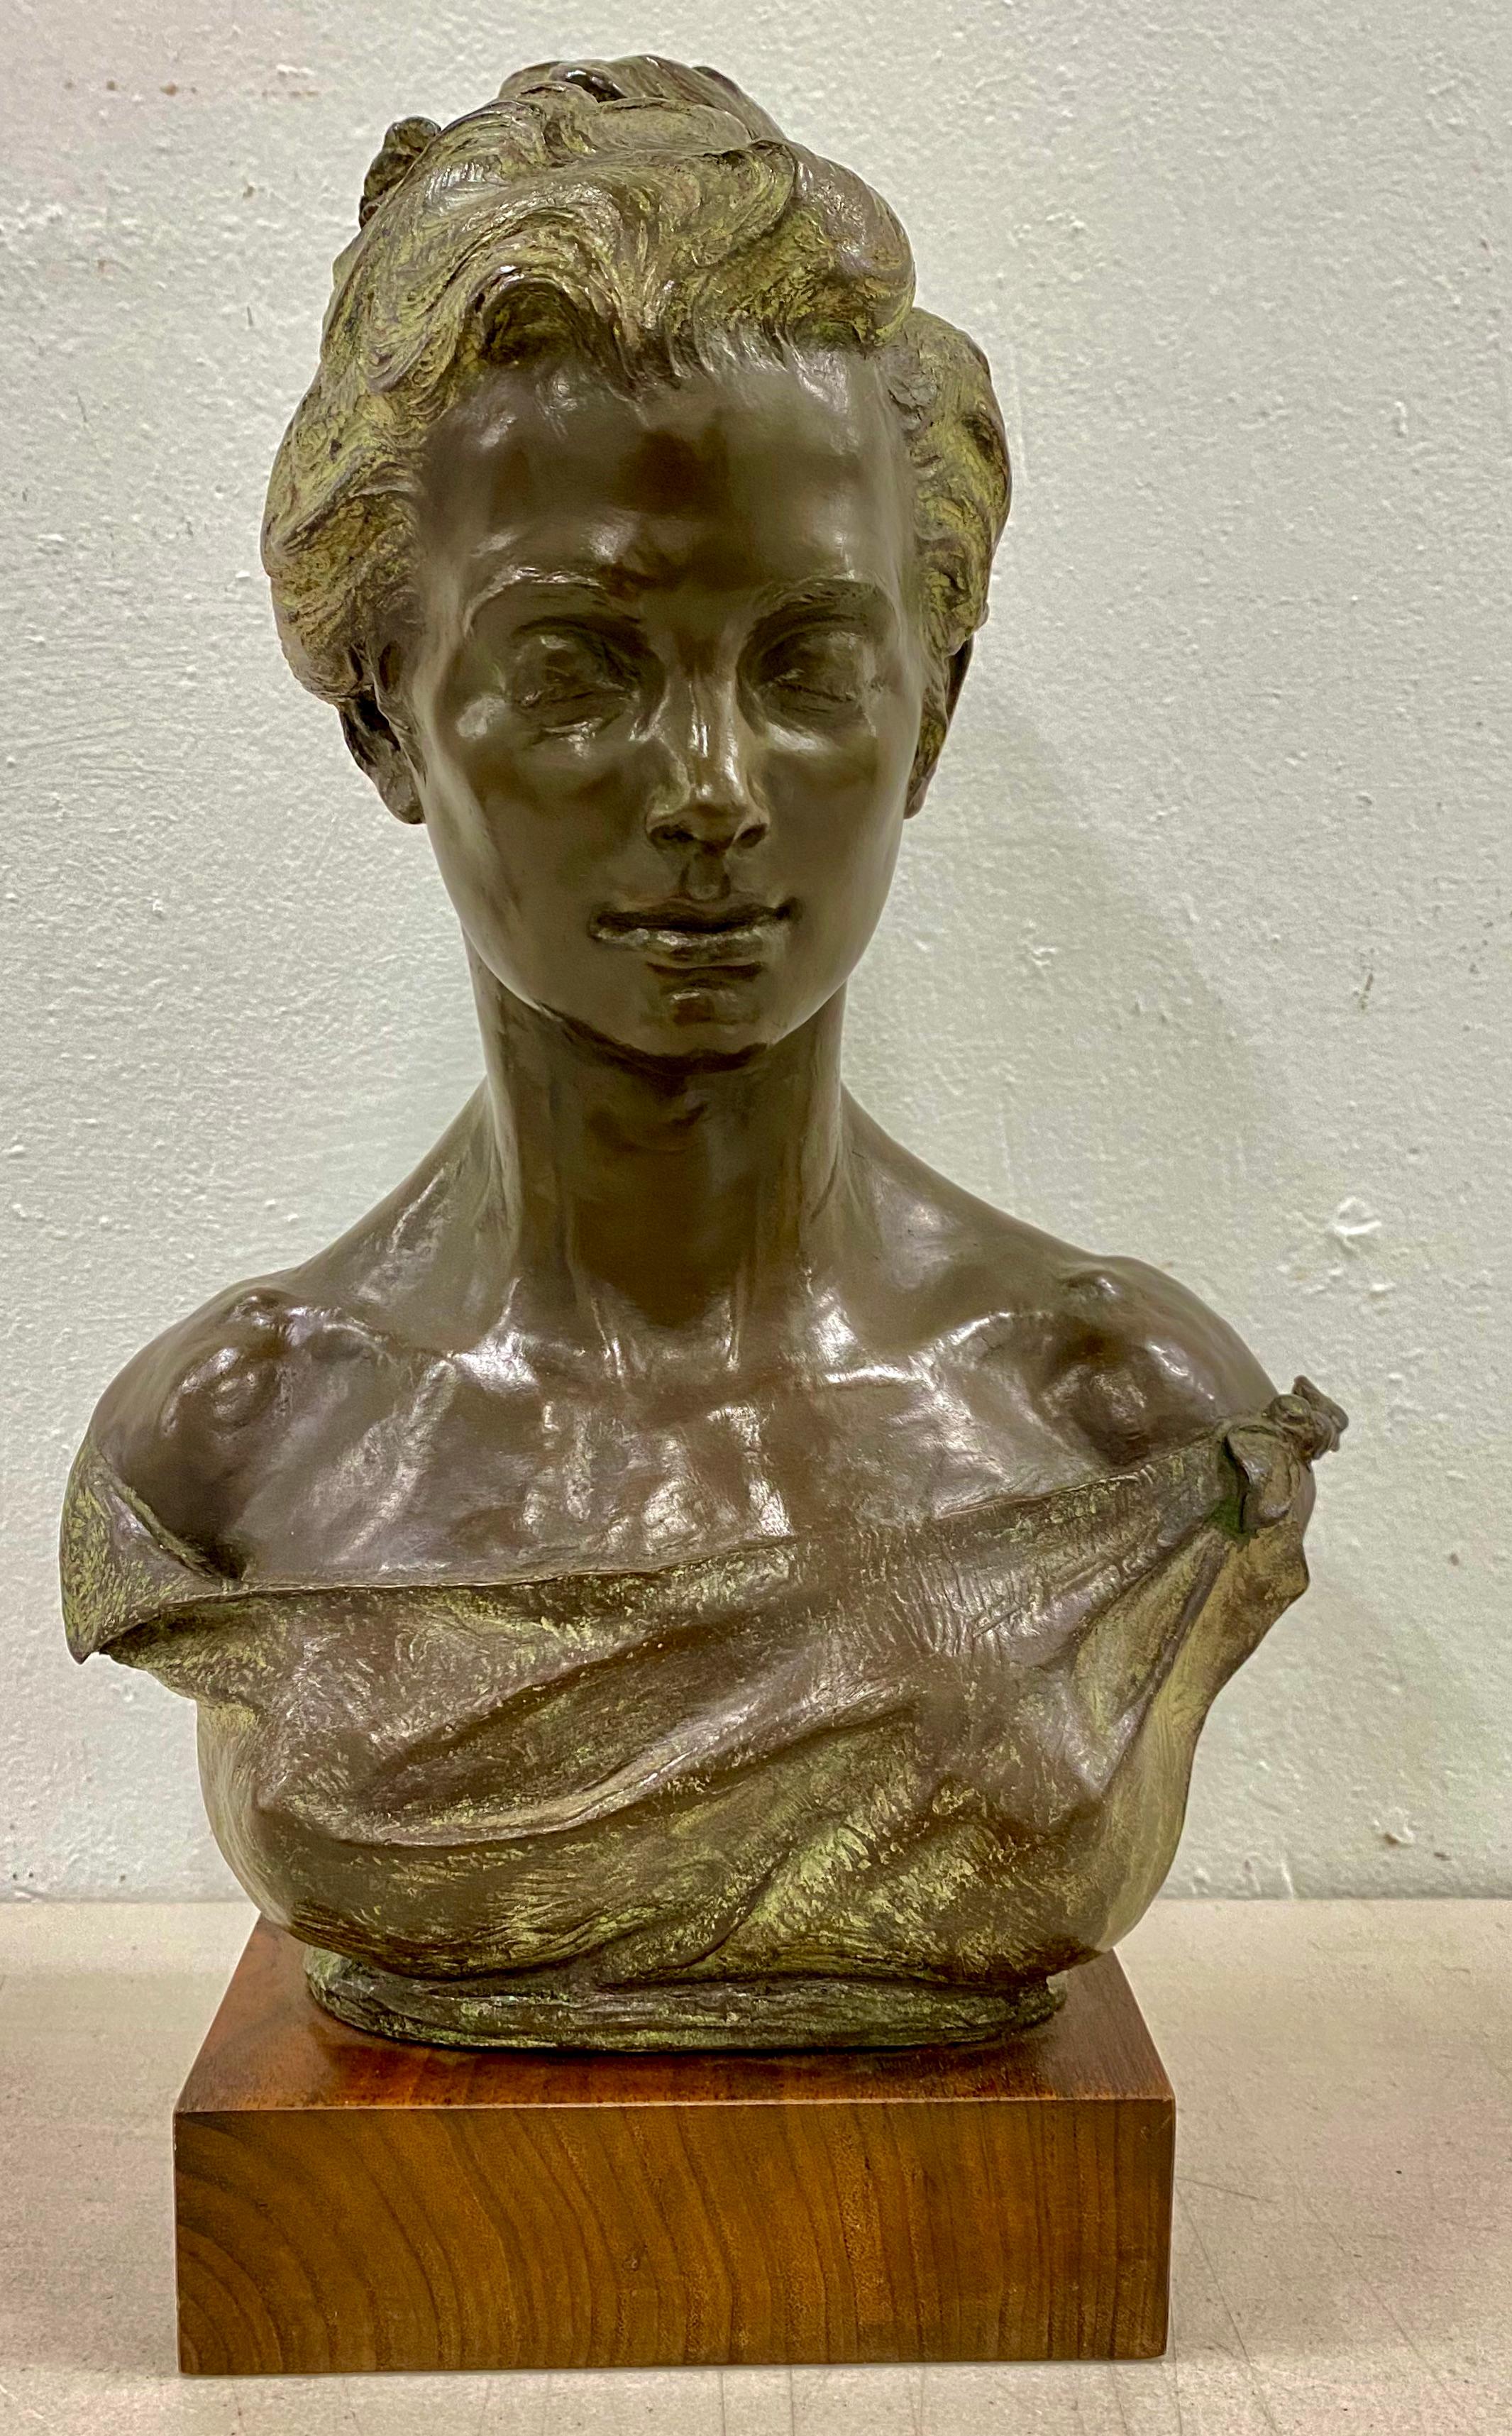 Unknown Figurative Sculpture - Early 20th Century Bronze Bust of an Elegant Young Woman C.1916